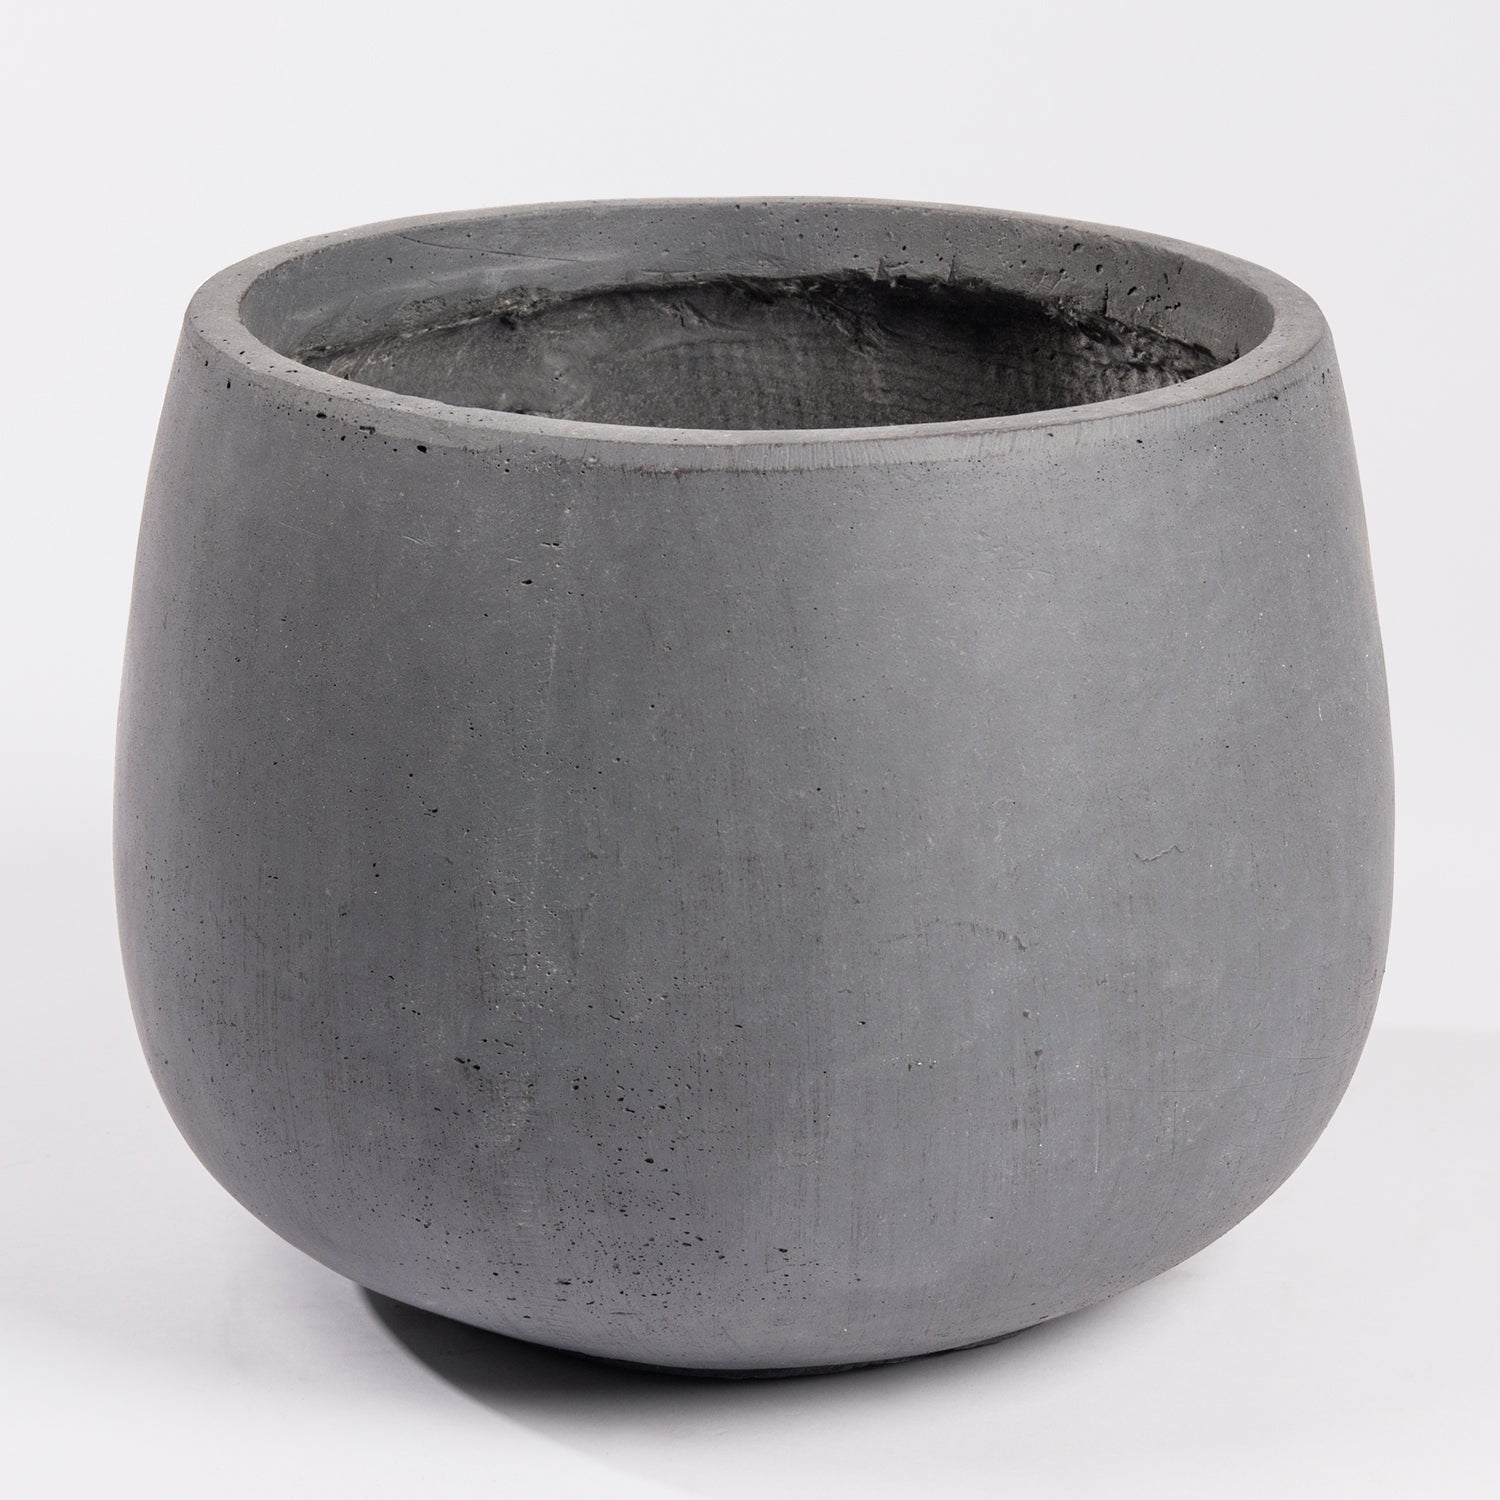 Distressed Smooth: Puddle Planter SM Grey, 10.5"H